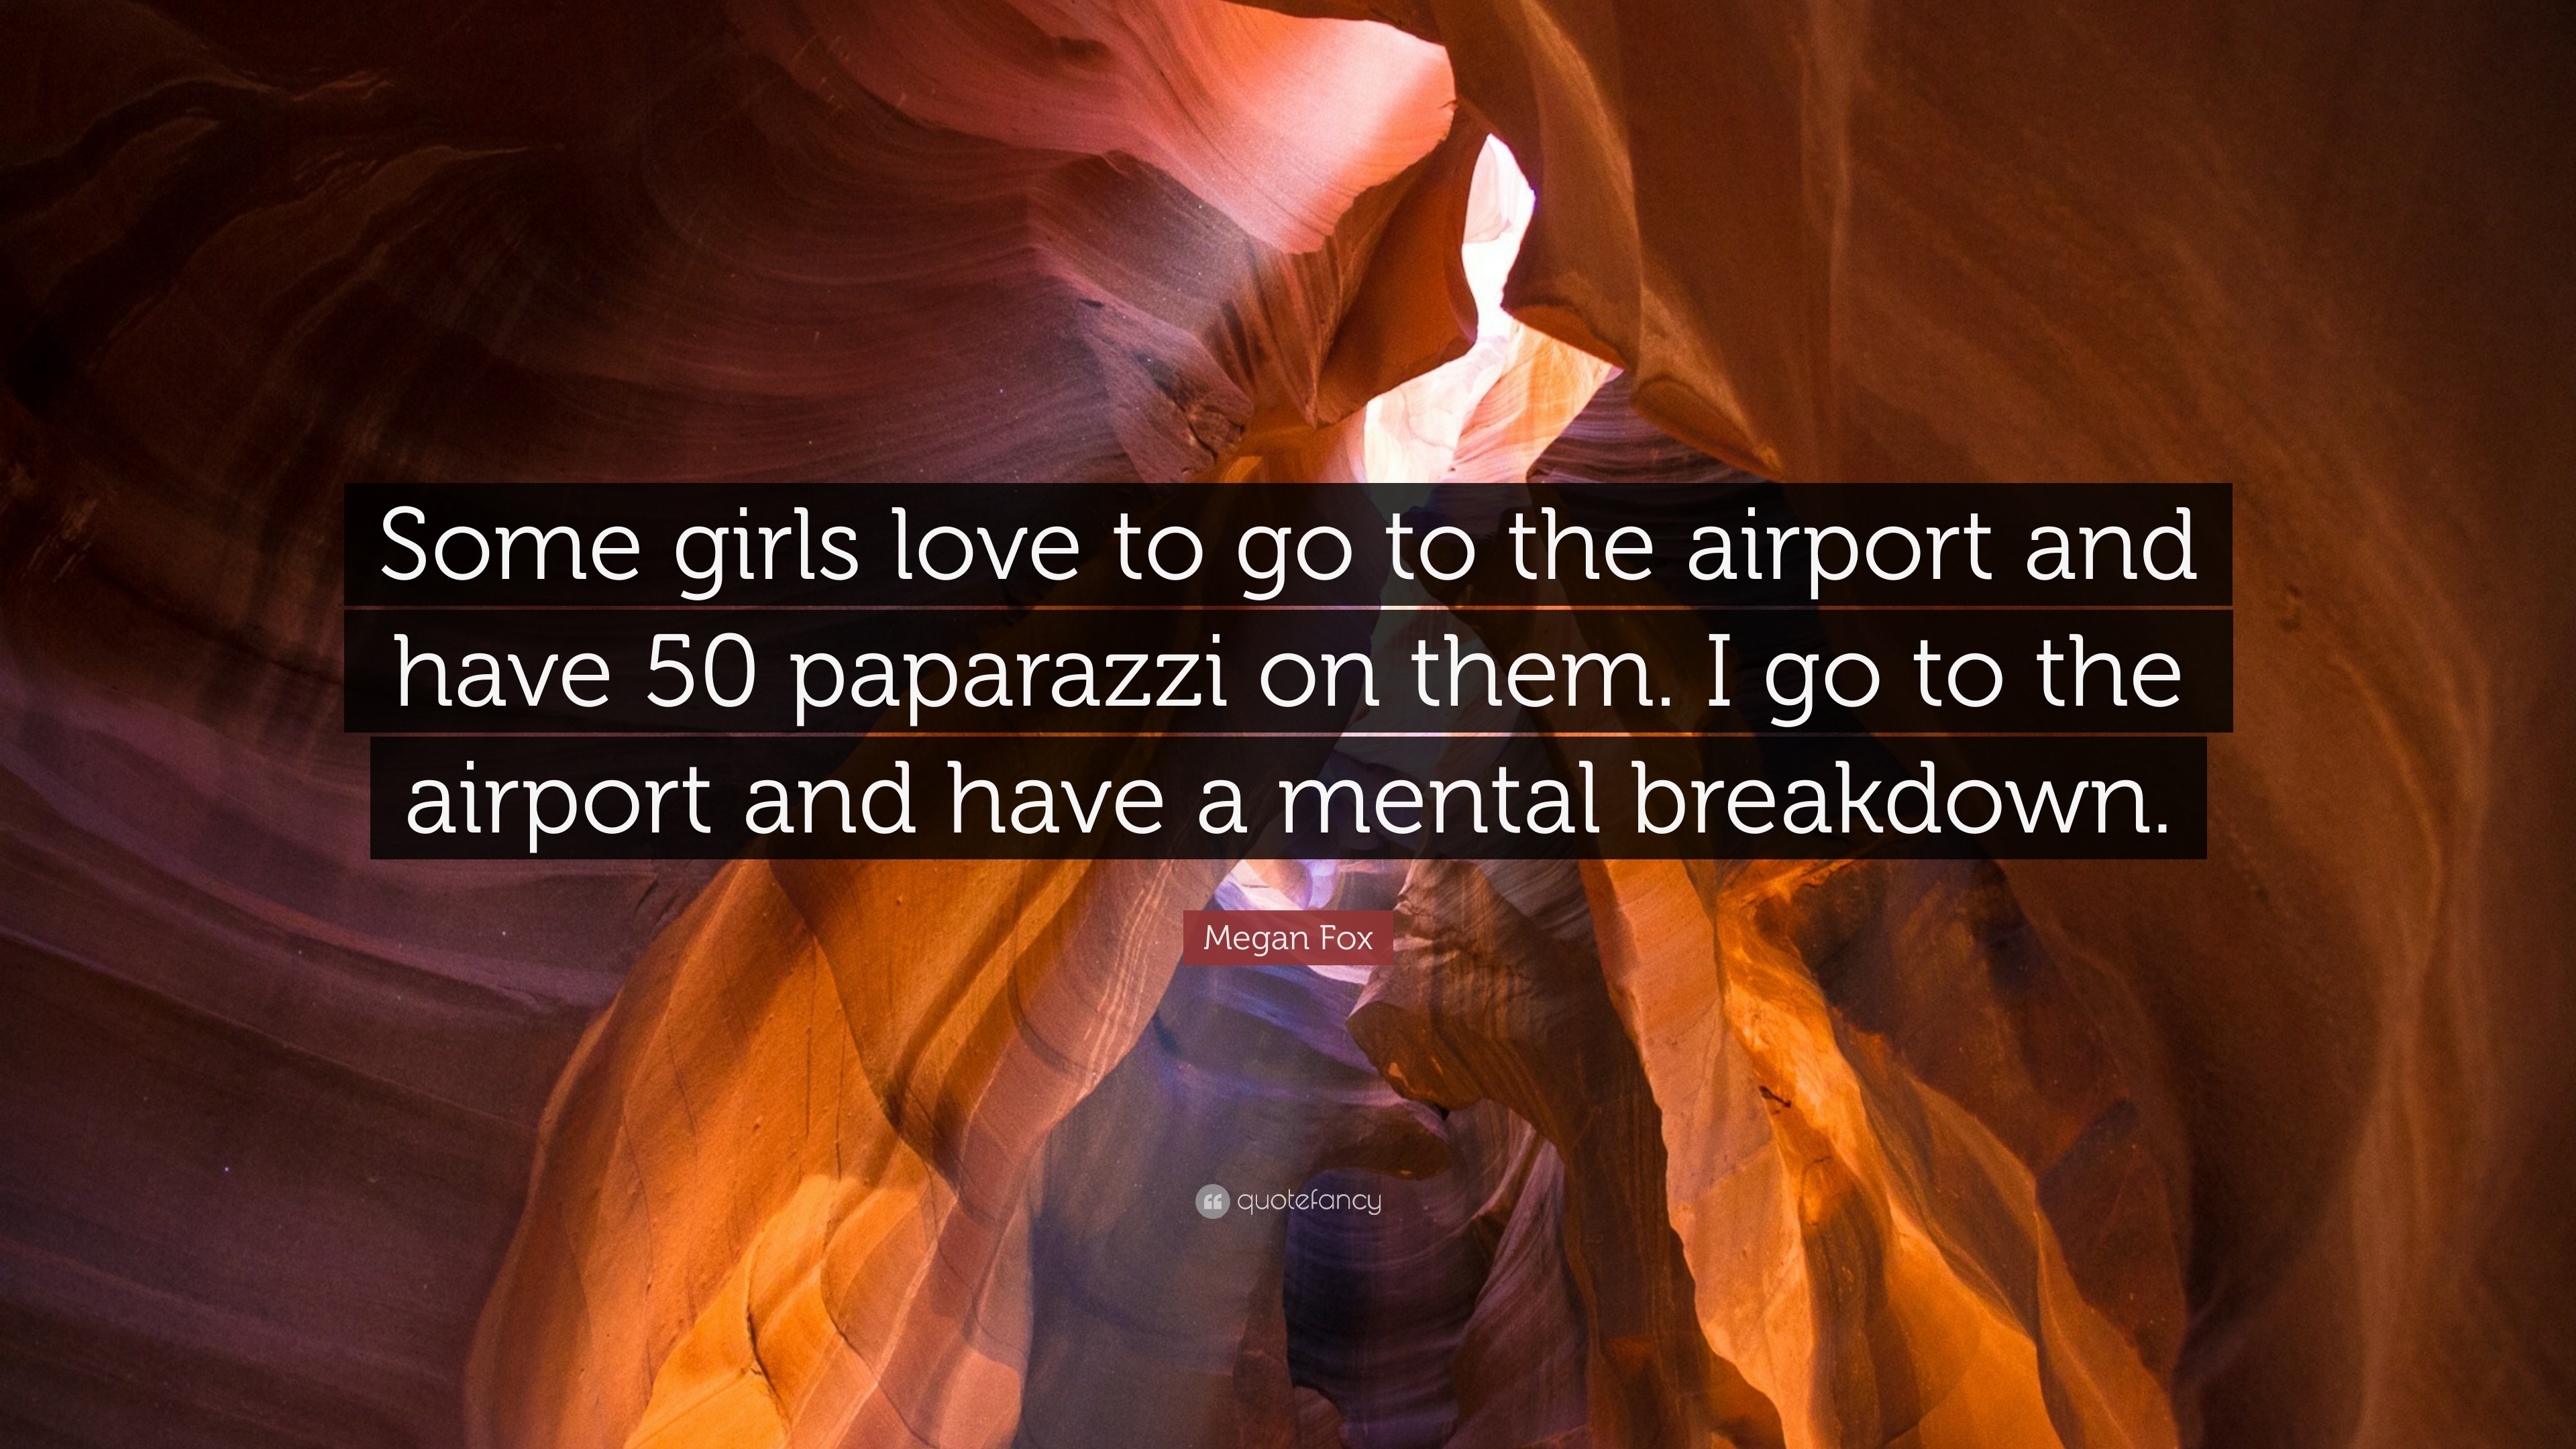 3840x2160 Megan Fox Quote: “Some girls love to go to the airport and have 50